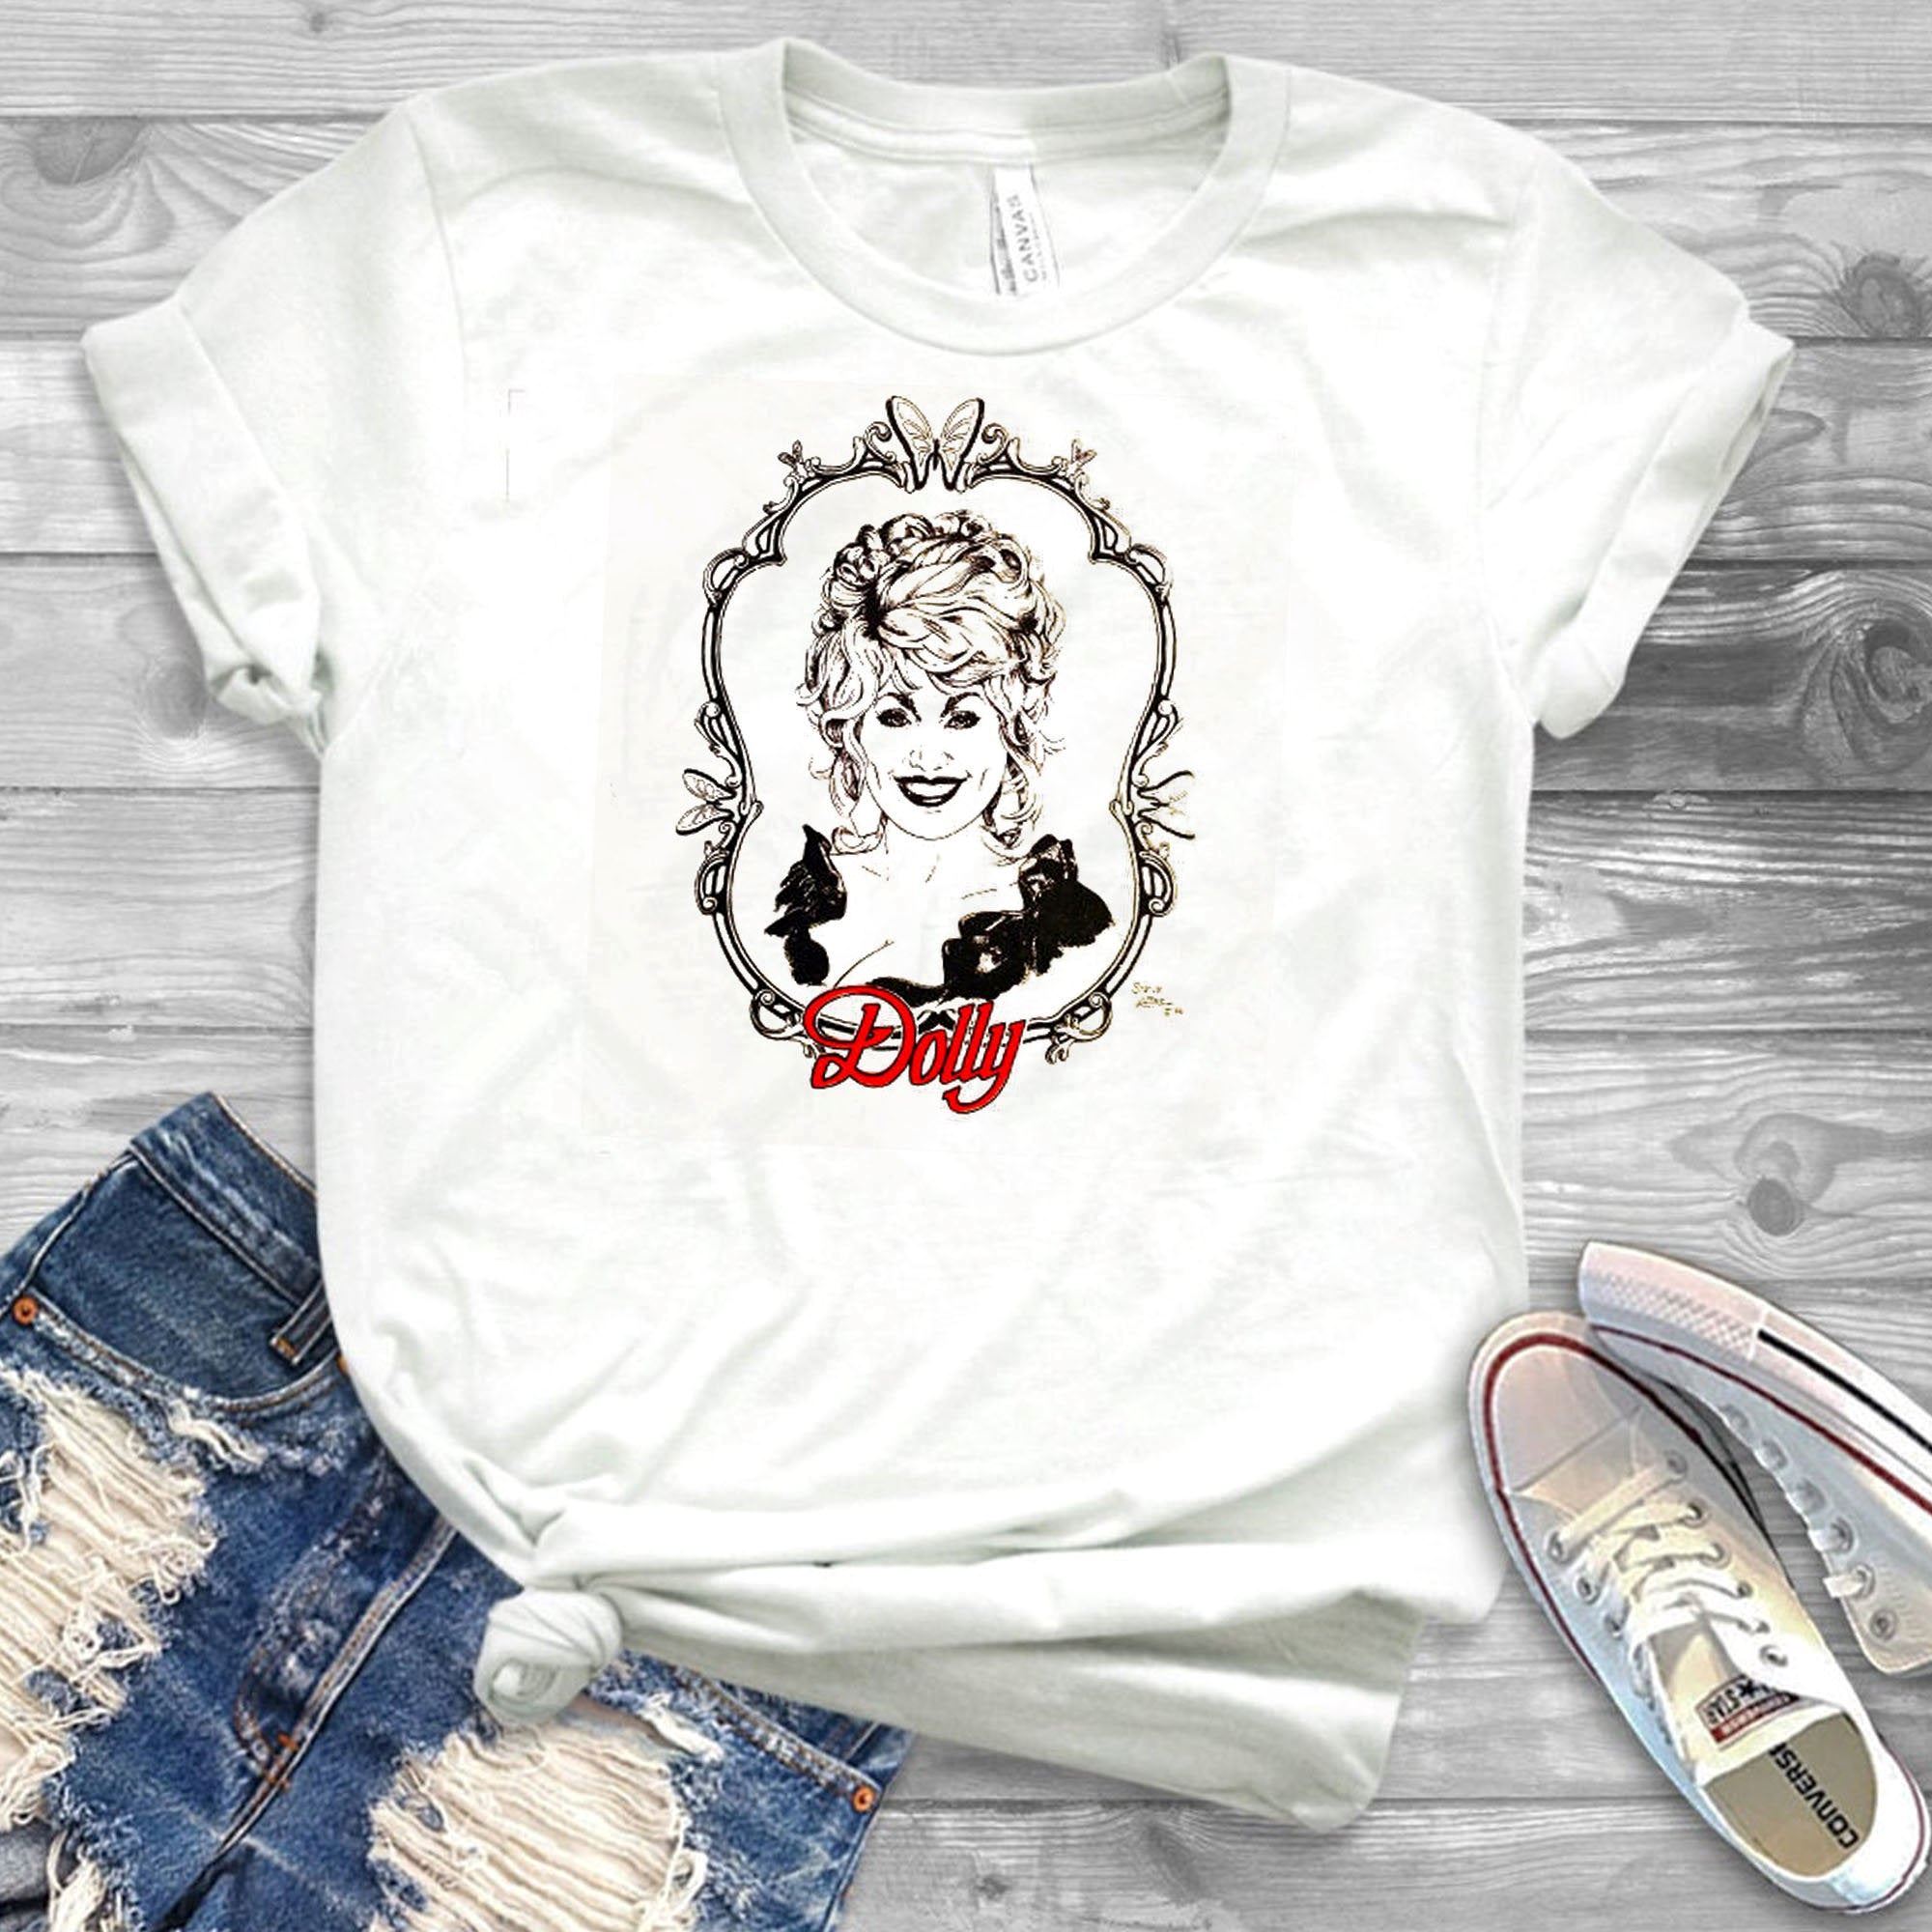 Gifts Dolly Parton 1986 Tour Classic Retro Cool Shirt Design Printed Art Shirt Gift For Men Women Mother Father Day Unisex T Shirt 